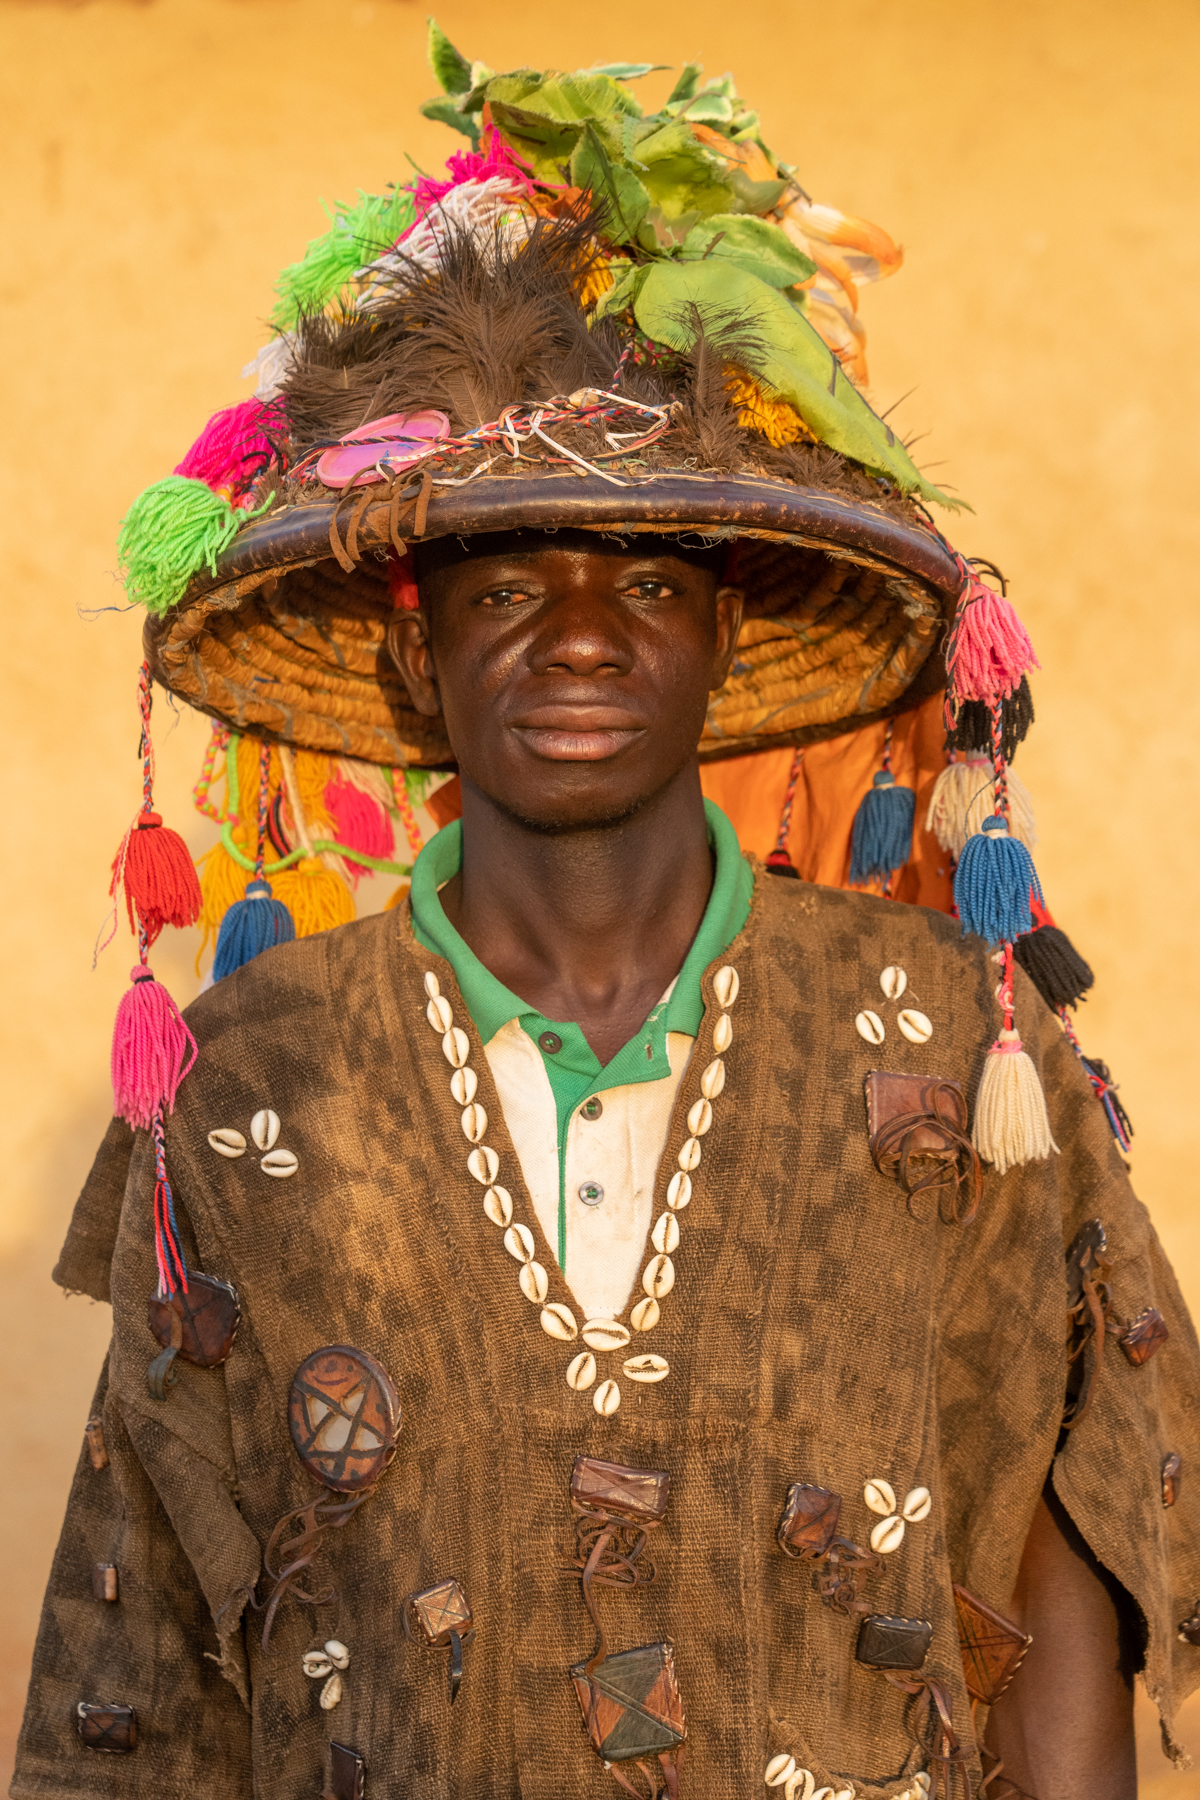 Wild Images Photography Tours | Ivory Coast Photography Tour - African ...